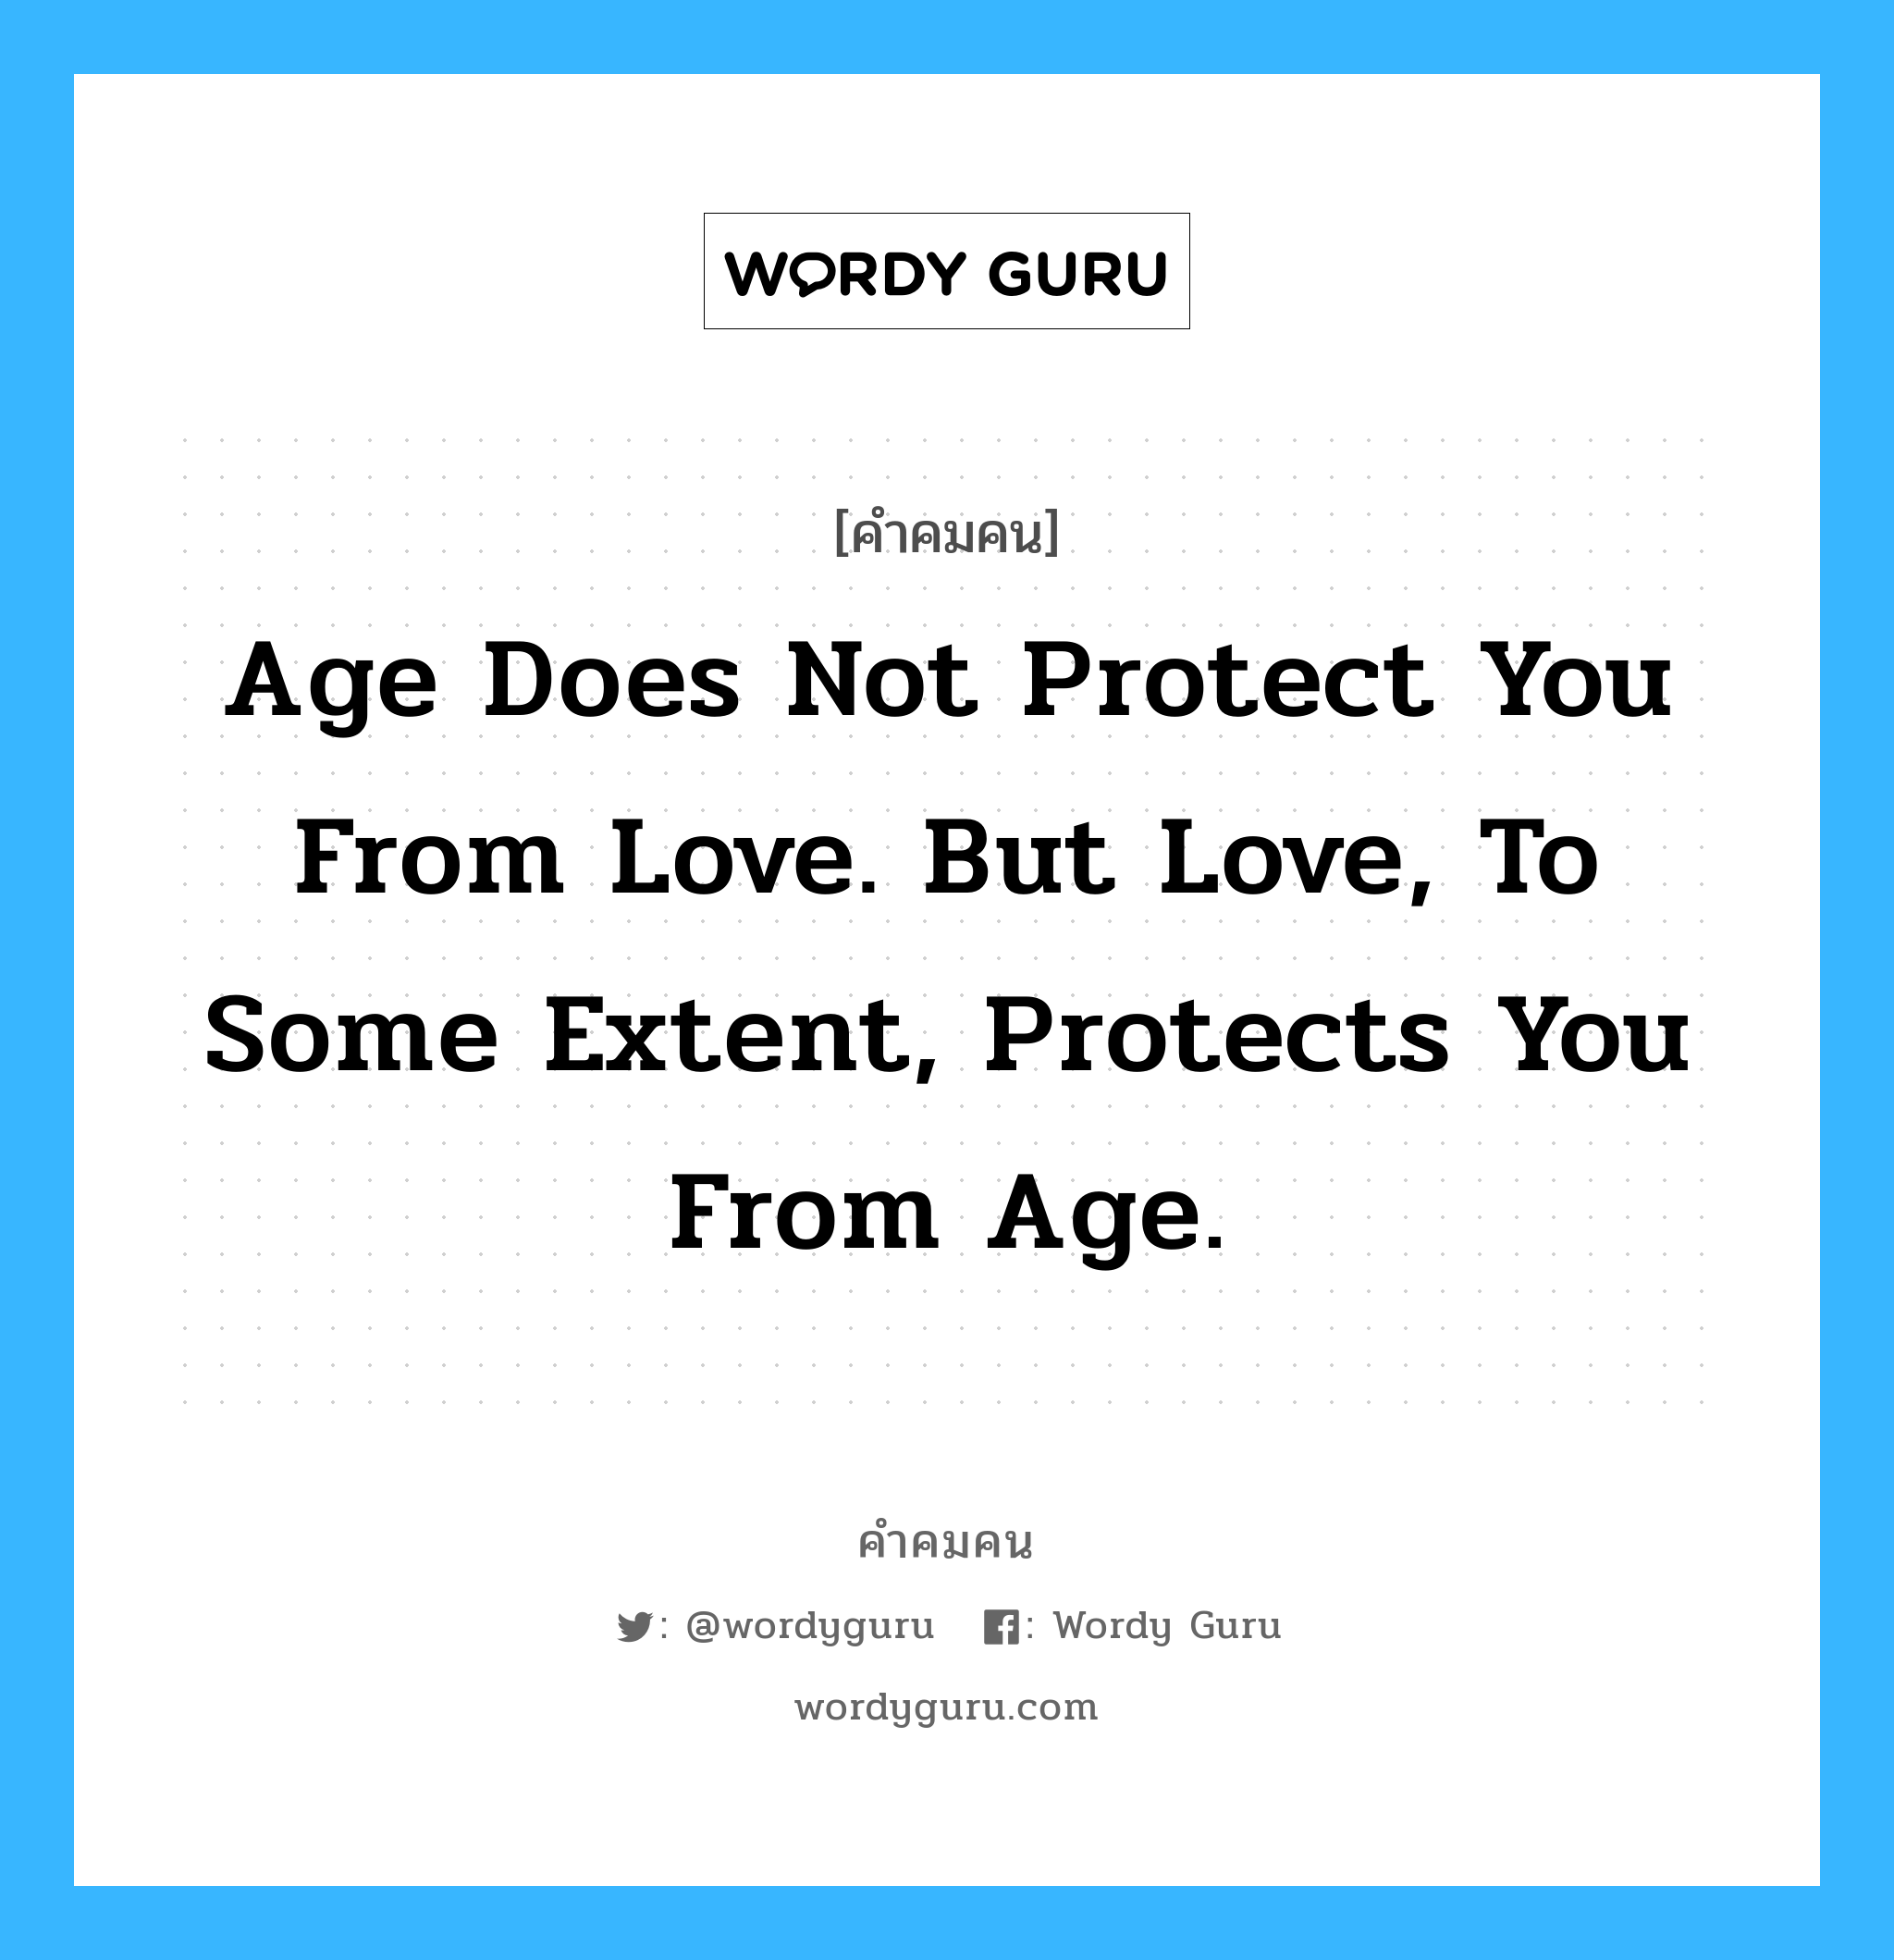 Age does not protect you from love. But love, to some extent, protects you from age., คำคมคน Age does not protect you from love. But love, to some extent, protects you from age. อายุป้องกันคุณจากความรักไม่ได้ แต่ความรักในจำนวนที่พอเหมาะ ปกป้องคุณจากอายุได้ Jeanne Moreau หมวด Jeanne Moreau